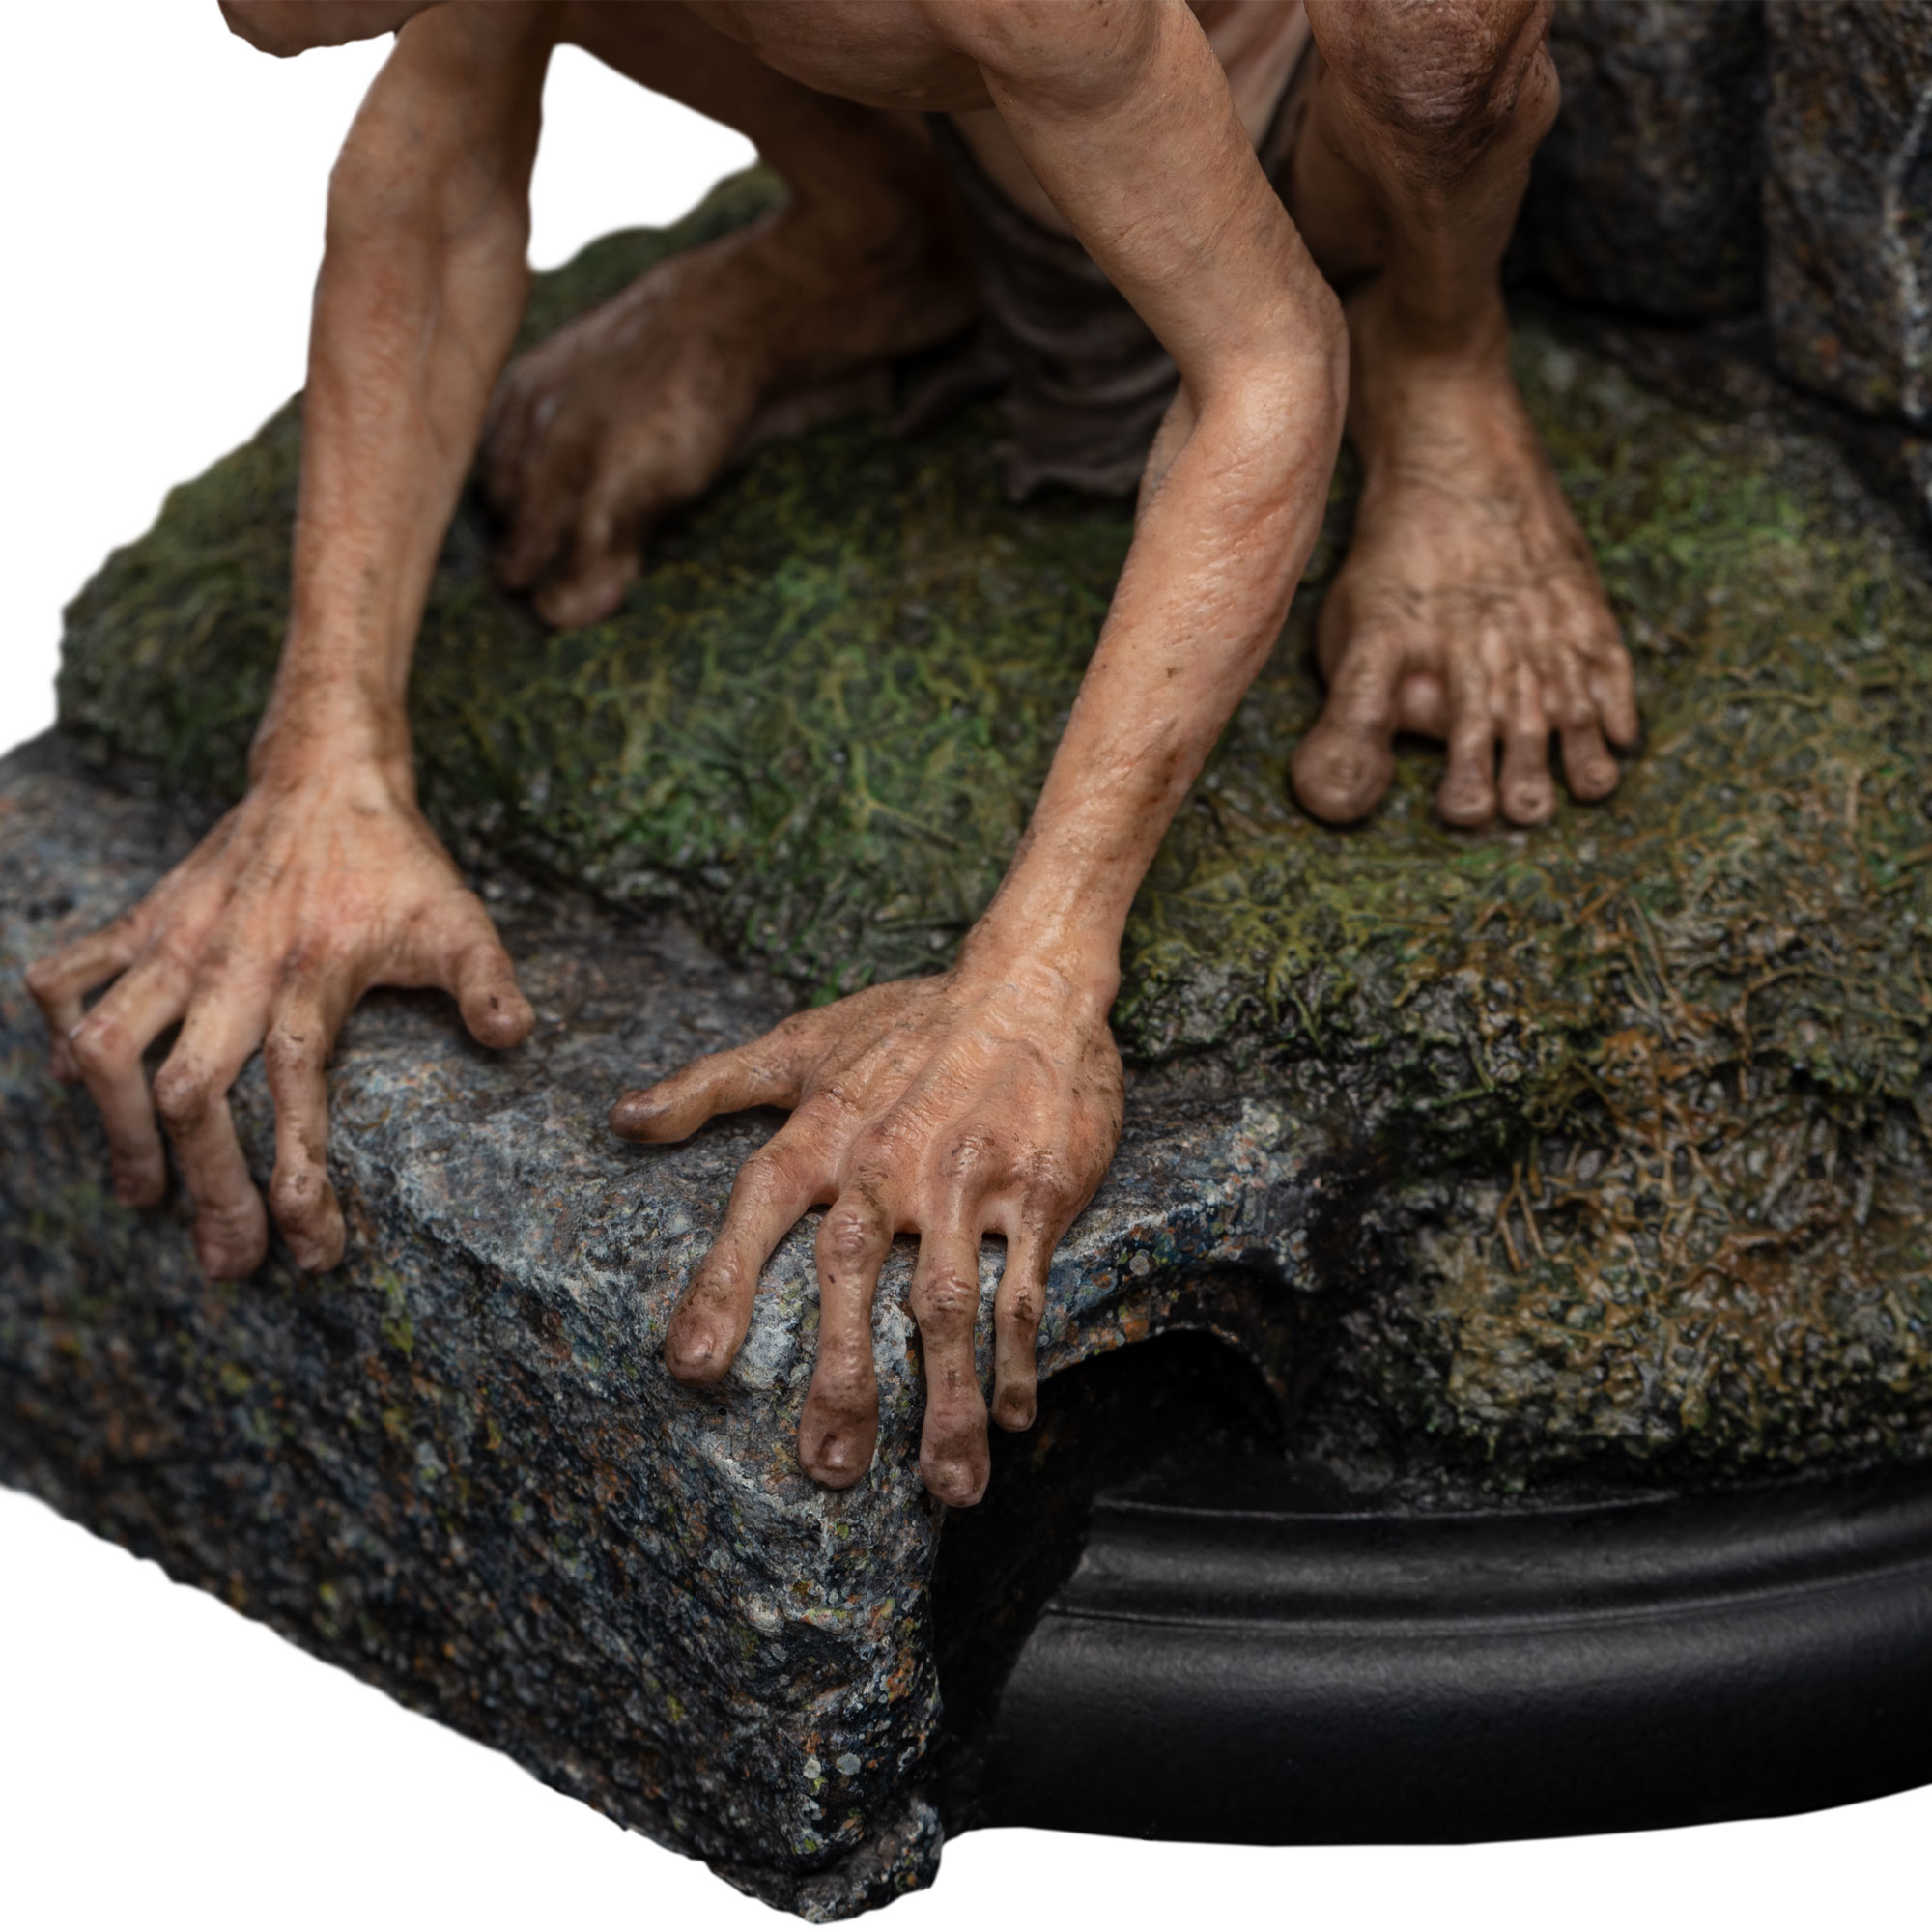 JUN229316 - LORD OF THE RINGS GOLLUM & SMEAGOL ITHILIEN LTD MINI STATUE -  Previews World